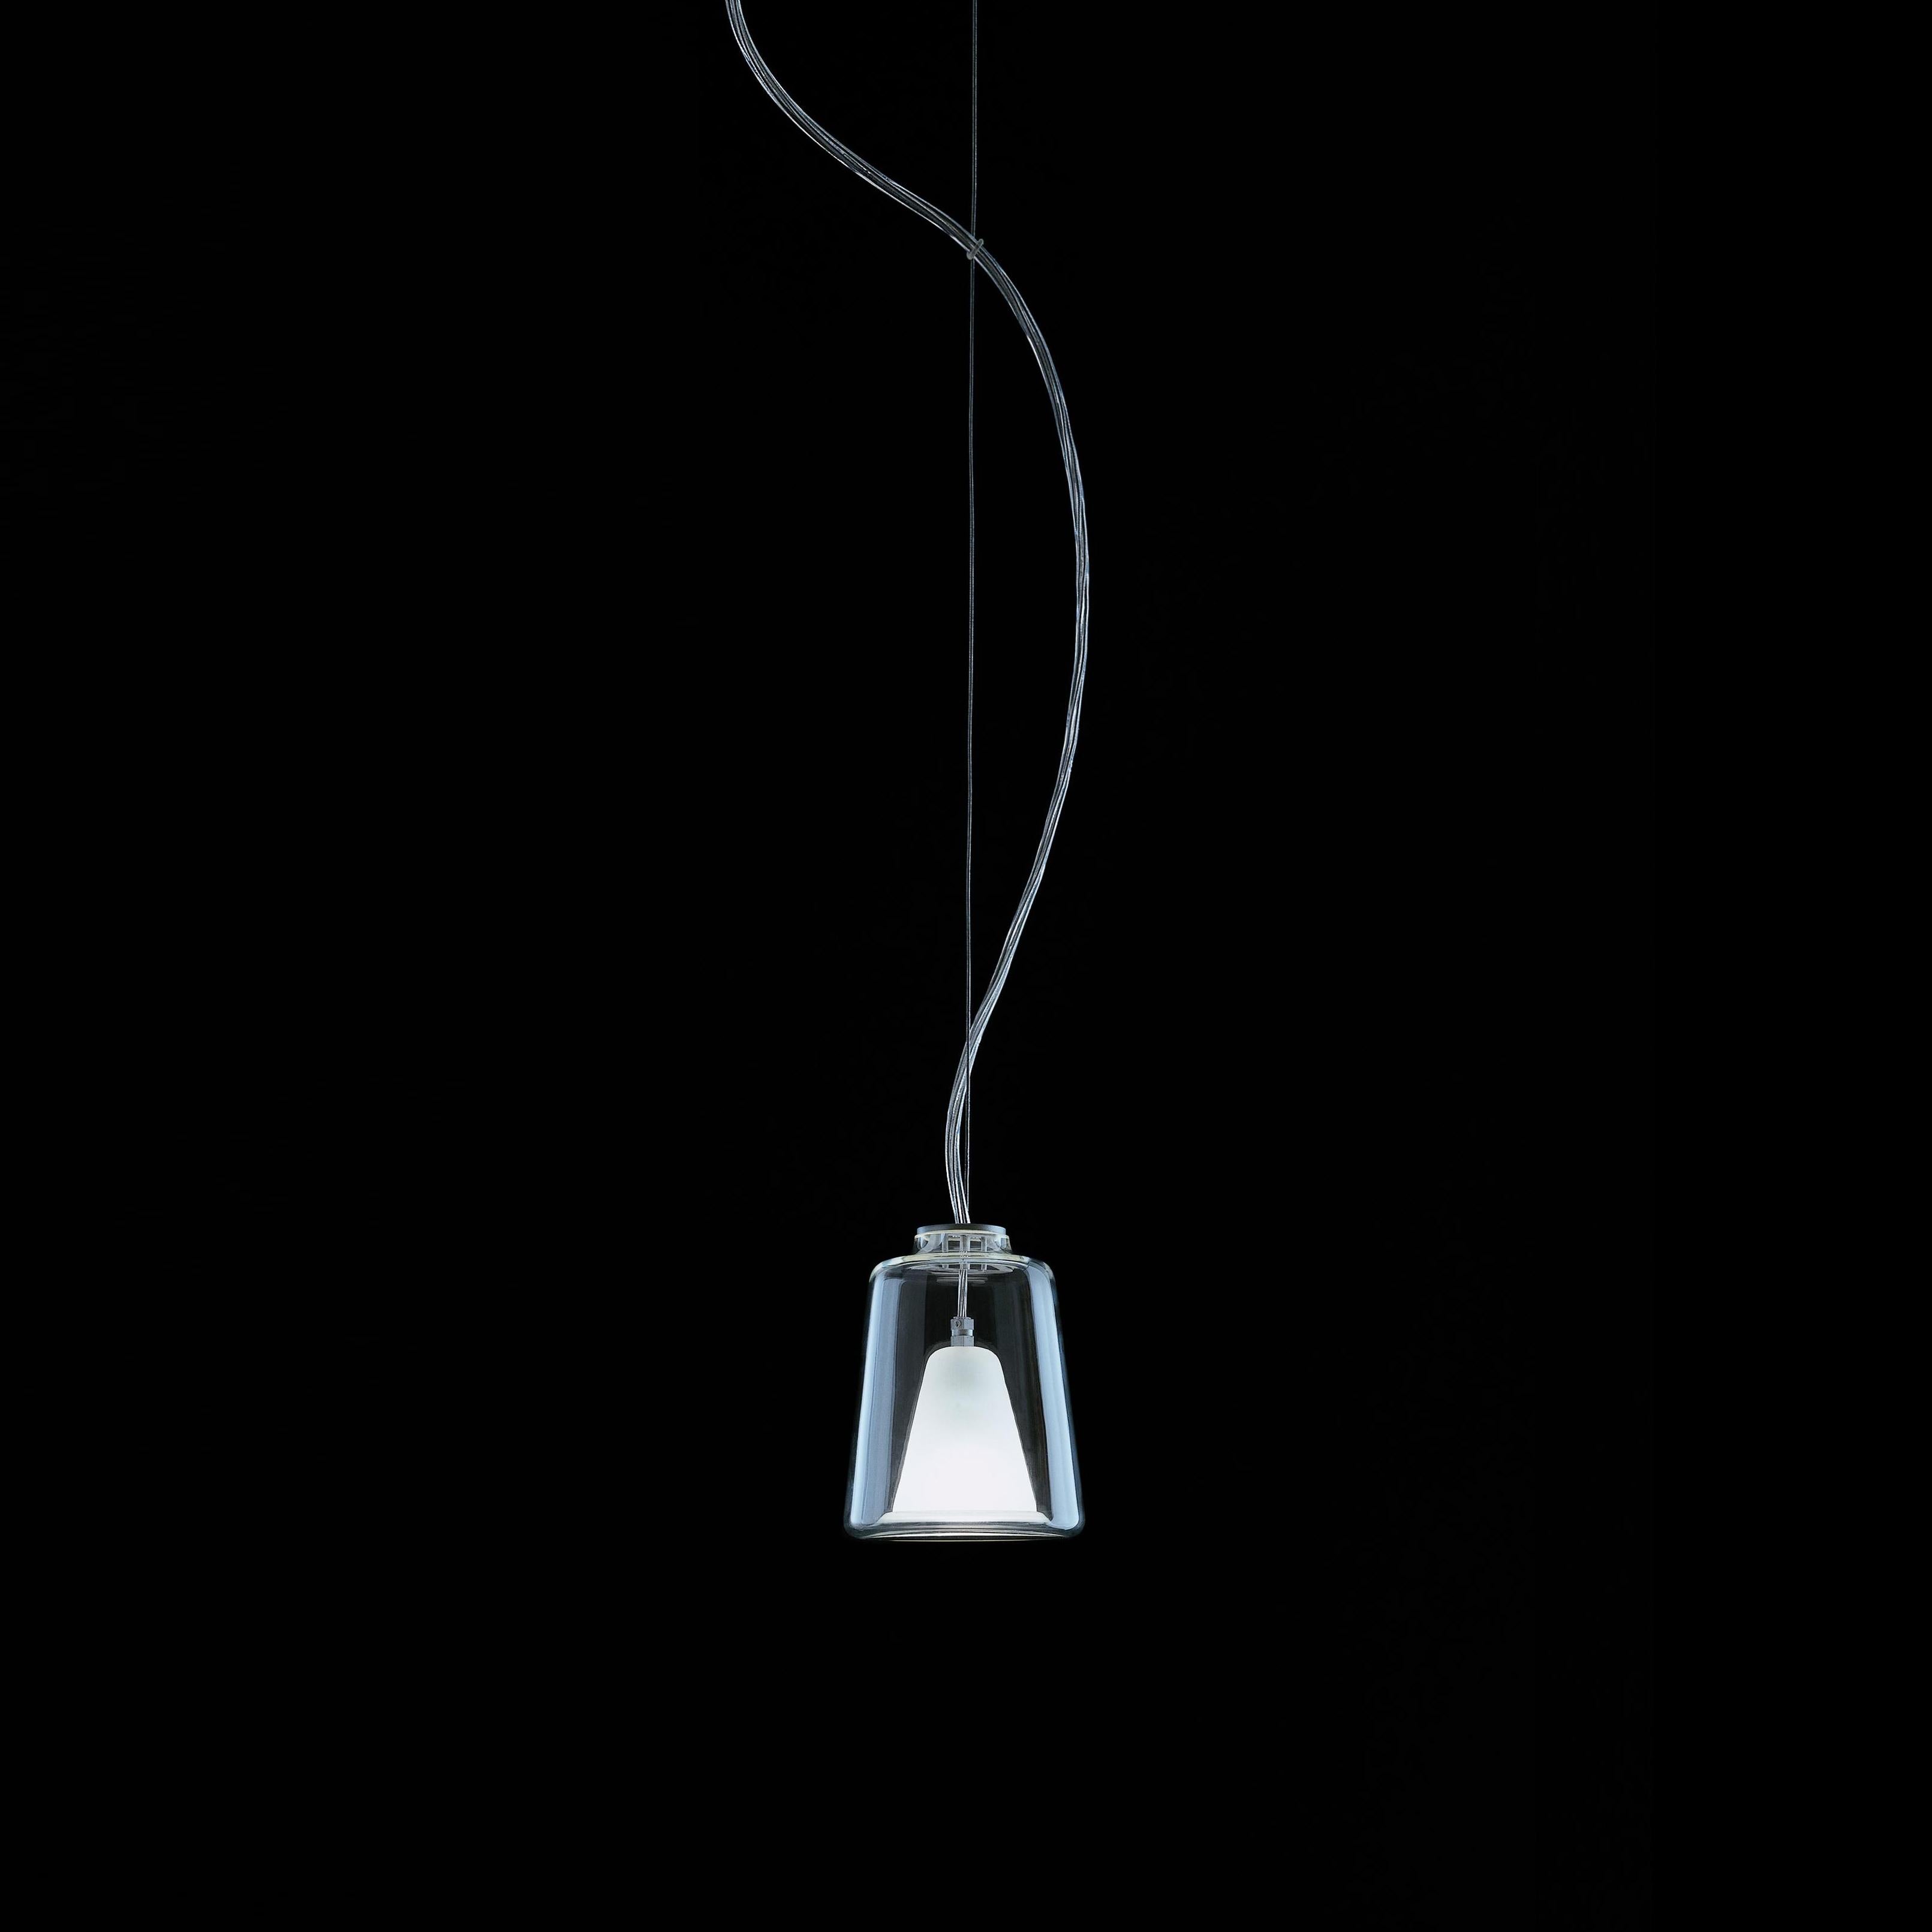 Suspension lamp 'Lanternina' designed by Marta Laudani & Marco Romanelli in 1998-2001. Suspension lamp giving diffused light. Transparent and sand-blasted Murano glass diffusers. Glazed anodized metal structure. Manufactured by Oluce, Italy.

With